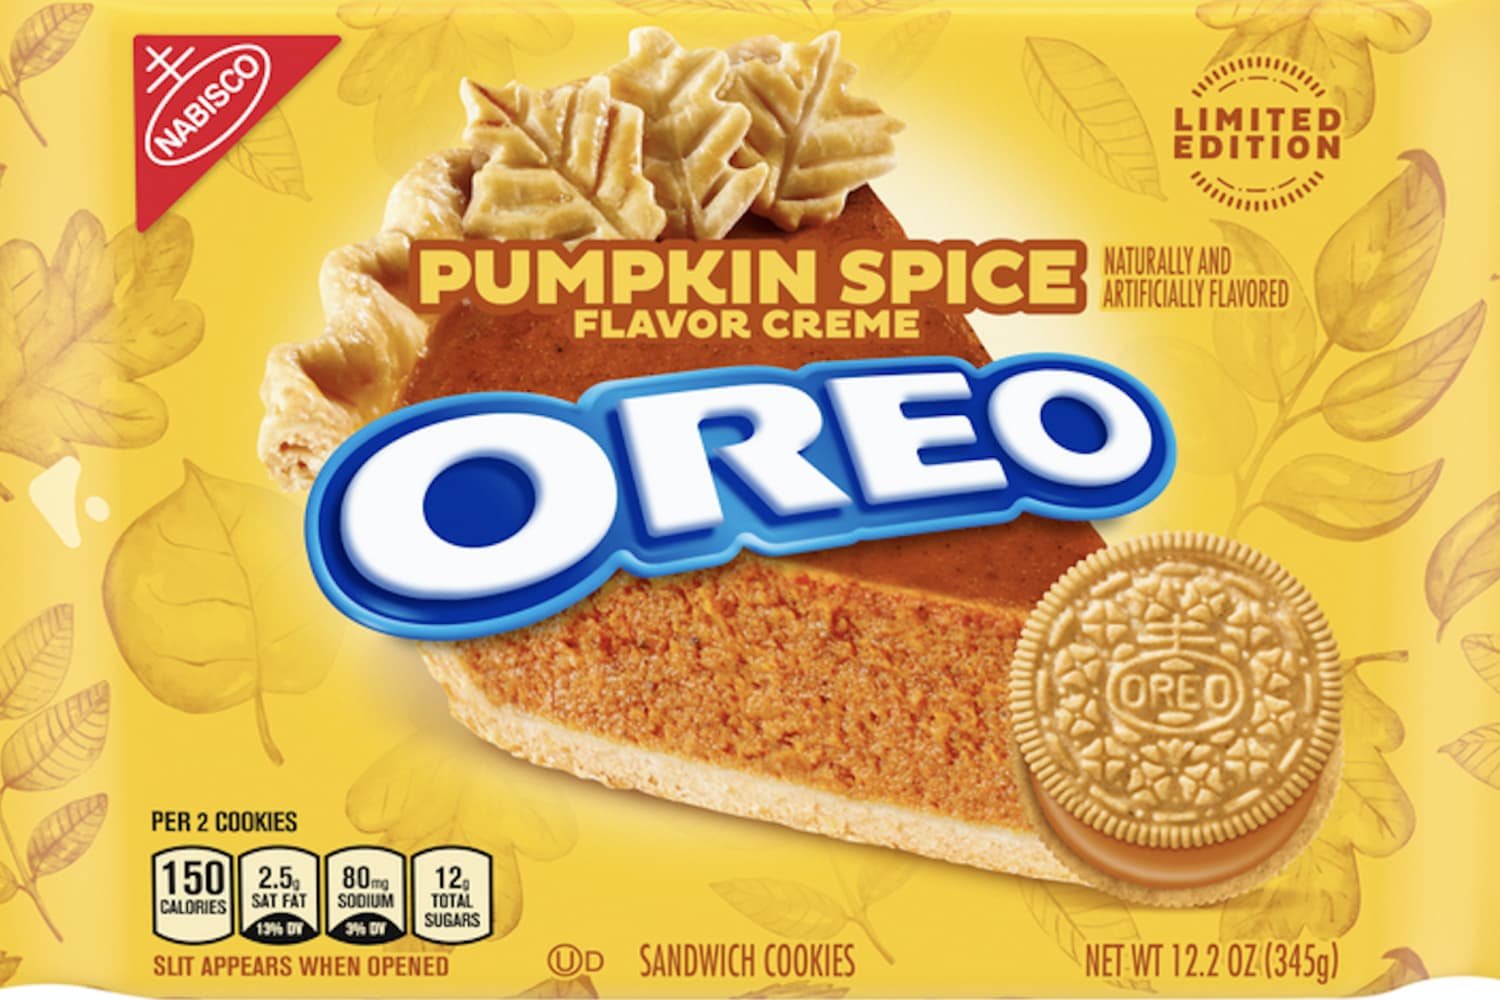 Pumpkin SpiceFlavored Oreos Are Returning to Shelves This Month The